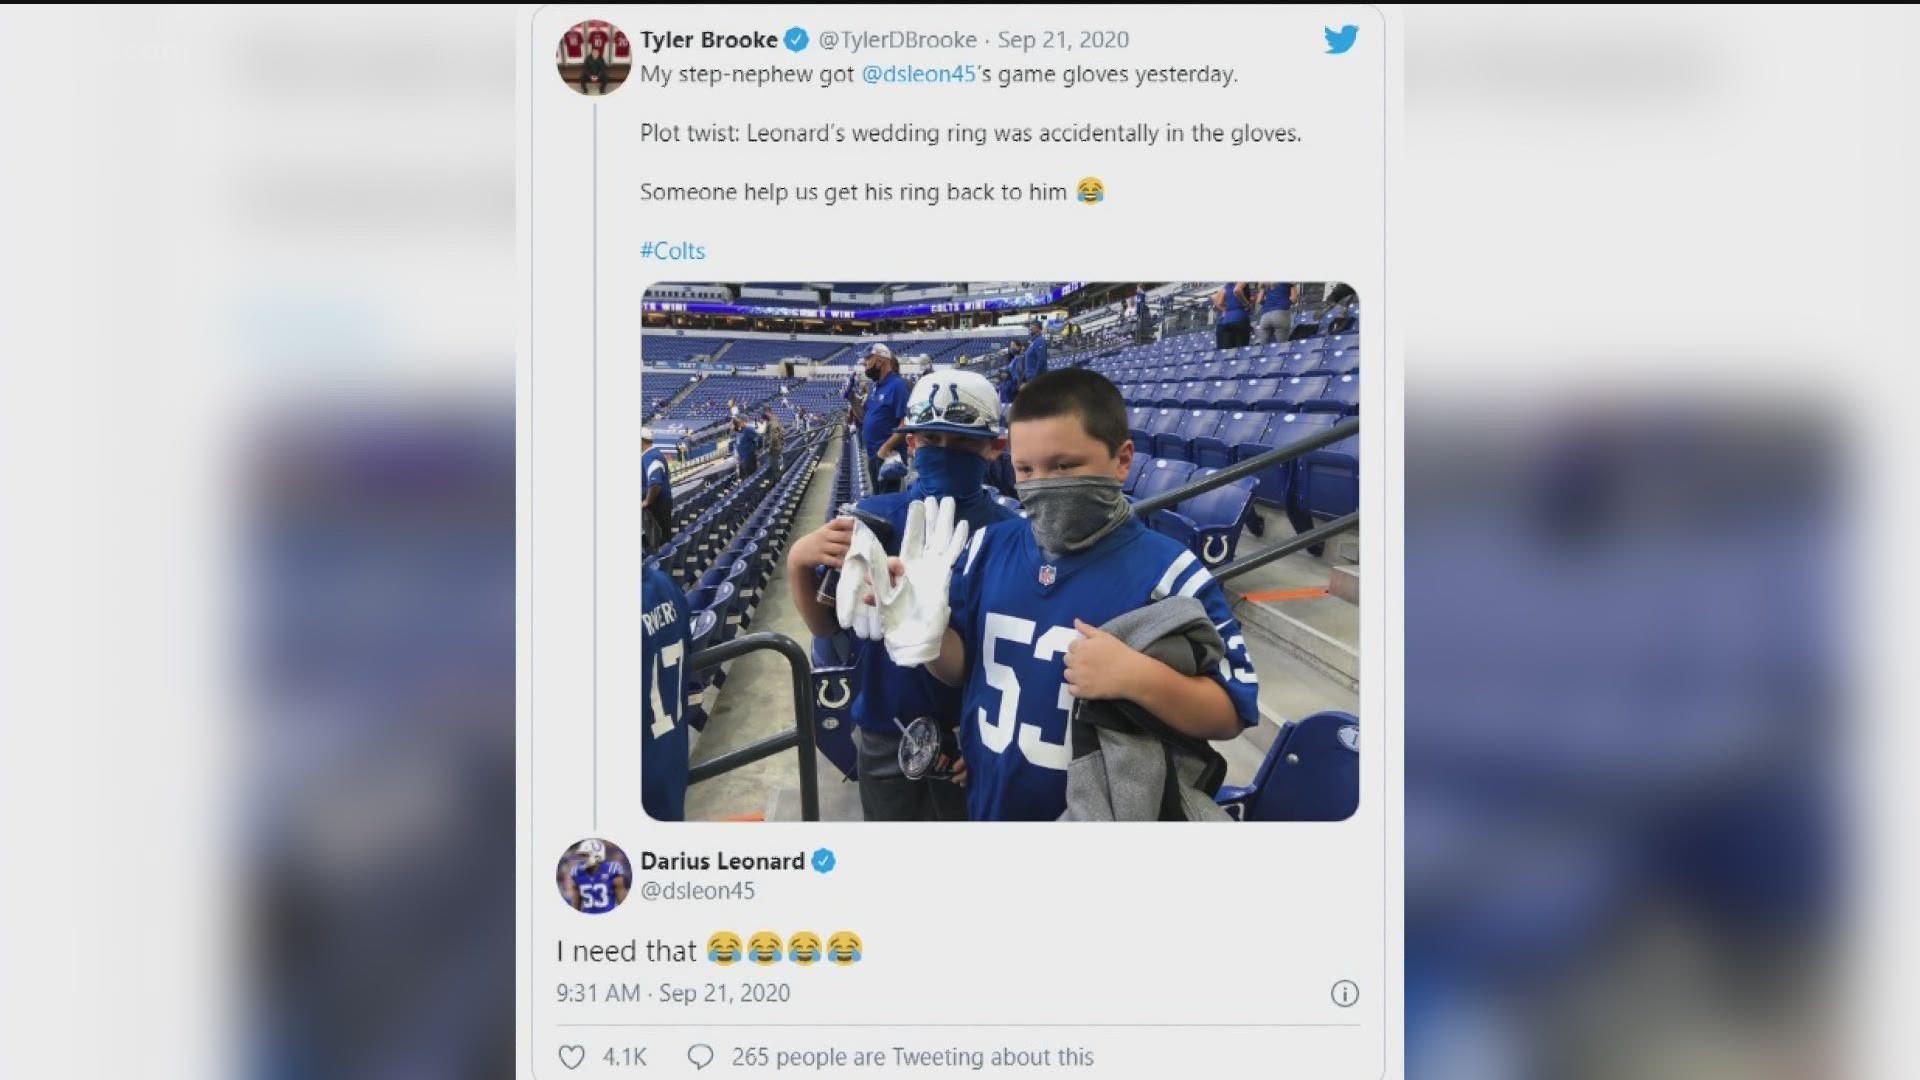 Oregon family cheers up firefighters with Baby Yoda, Colts LB accidentally gives away wedding ring inside glove he gave to kid & Gucci stains denim with grass.